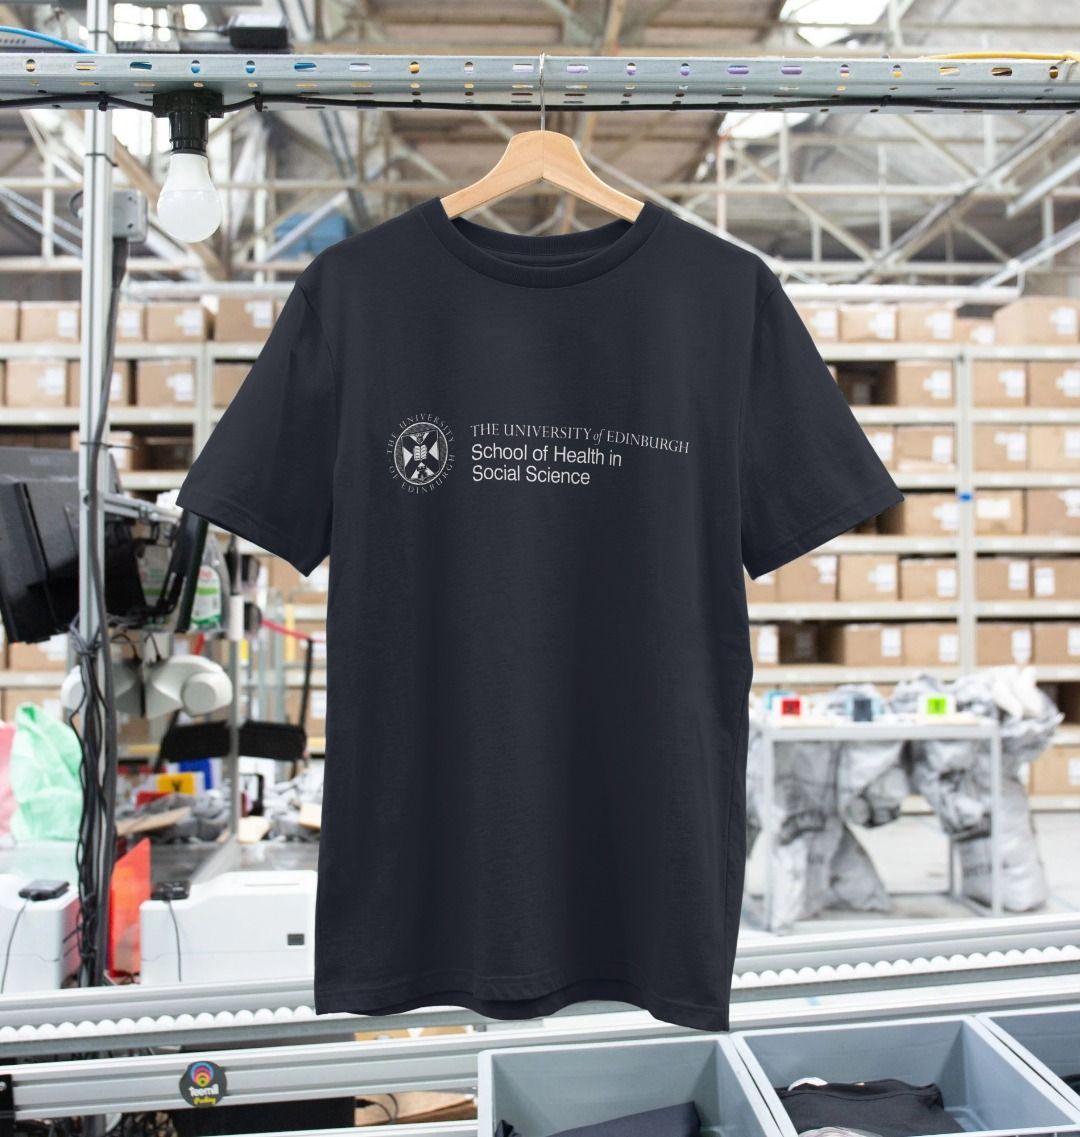 Our School of Health in Social Science T-Shirt being printed by our print on demand partner, teemill.